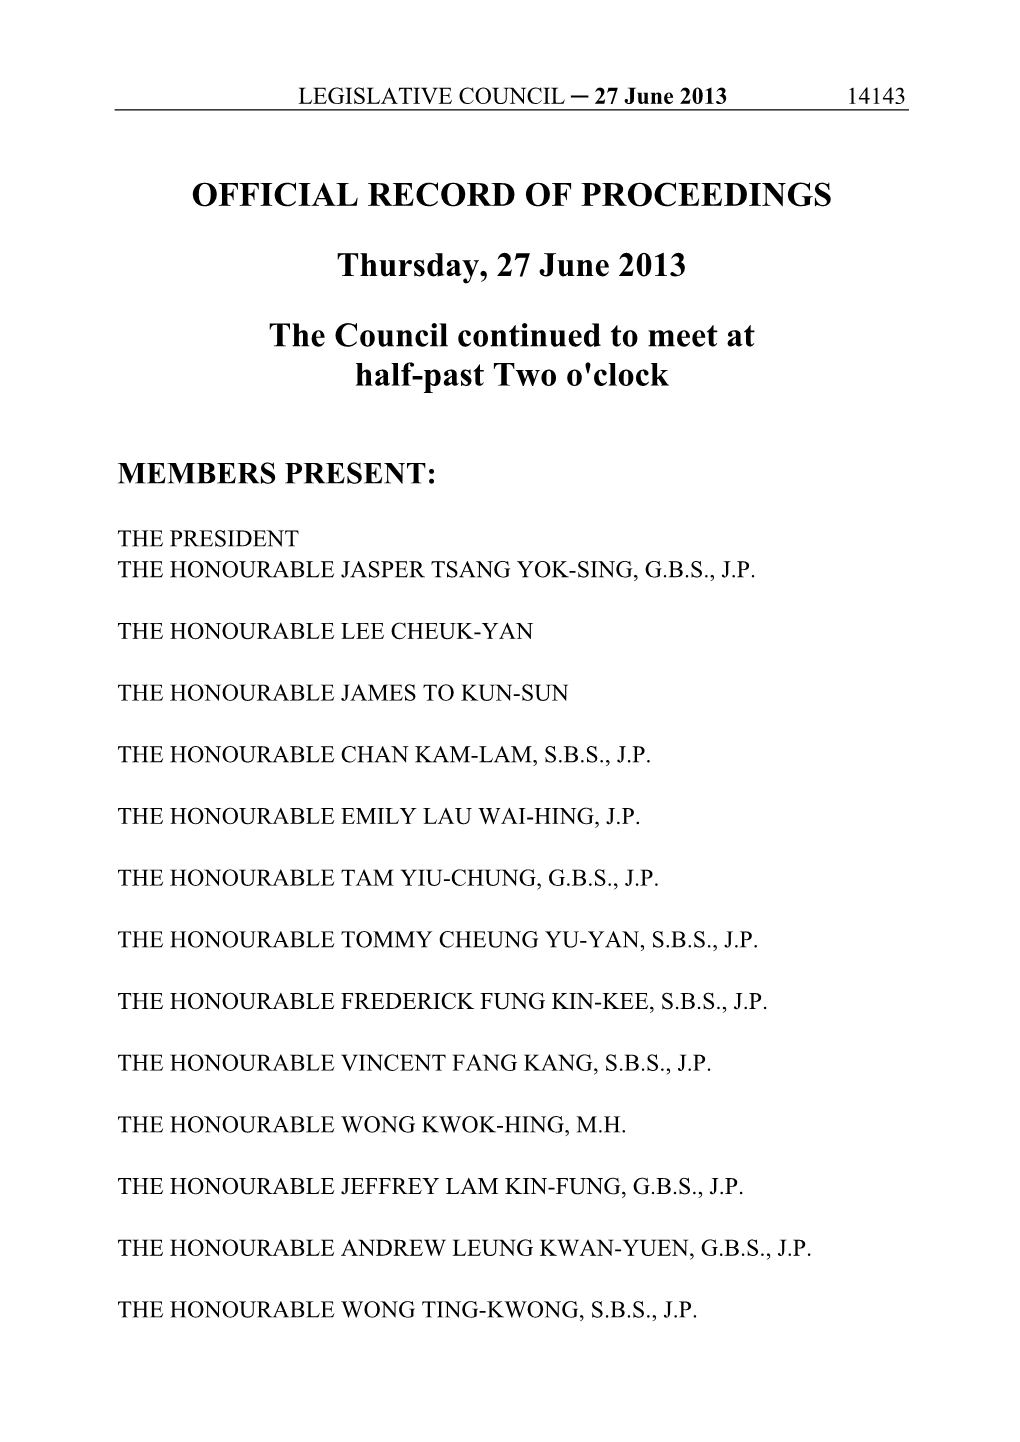 OFFICIAL RECORD of PROCEEDINGS Thursday, 27 June